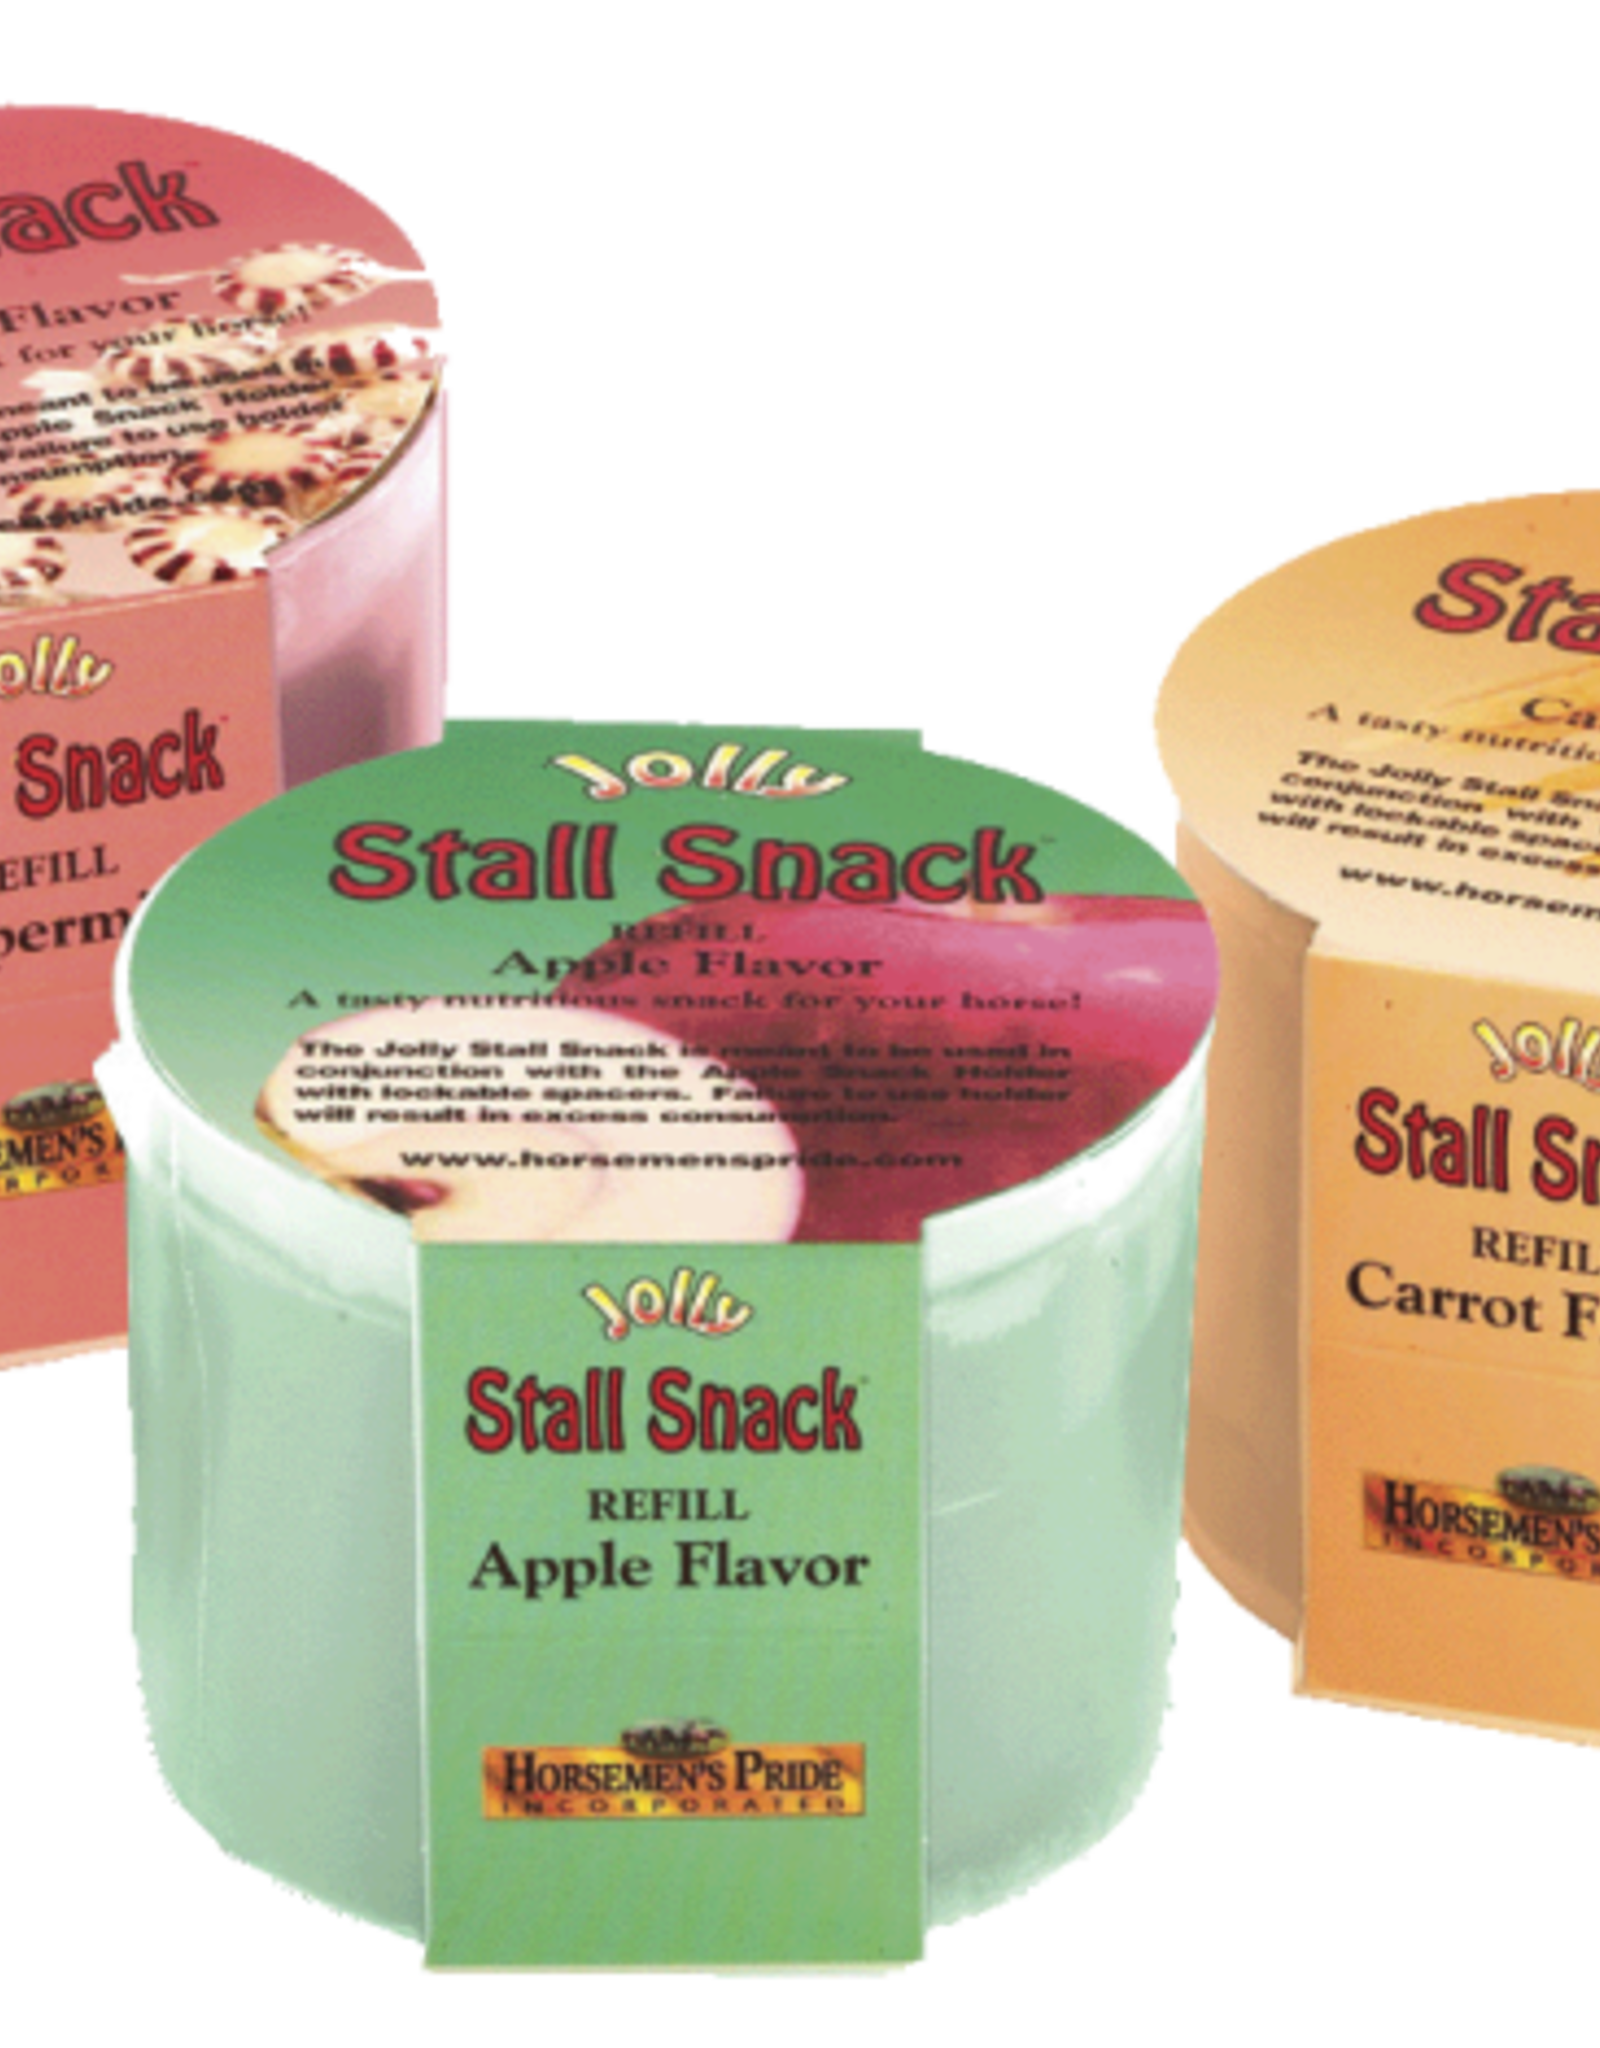 Jolly Stall Snack Refill - Peppermint